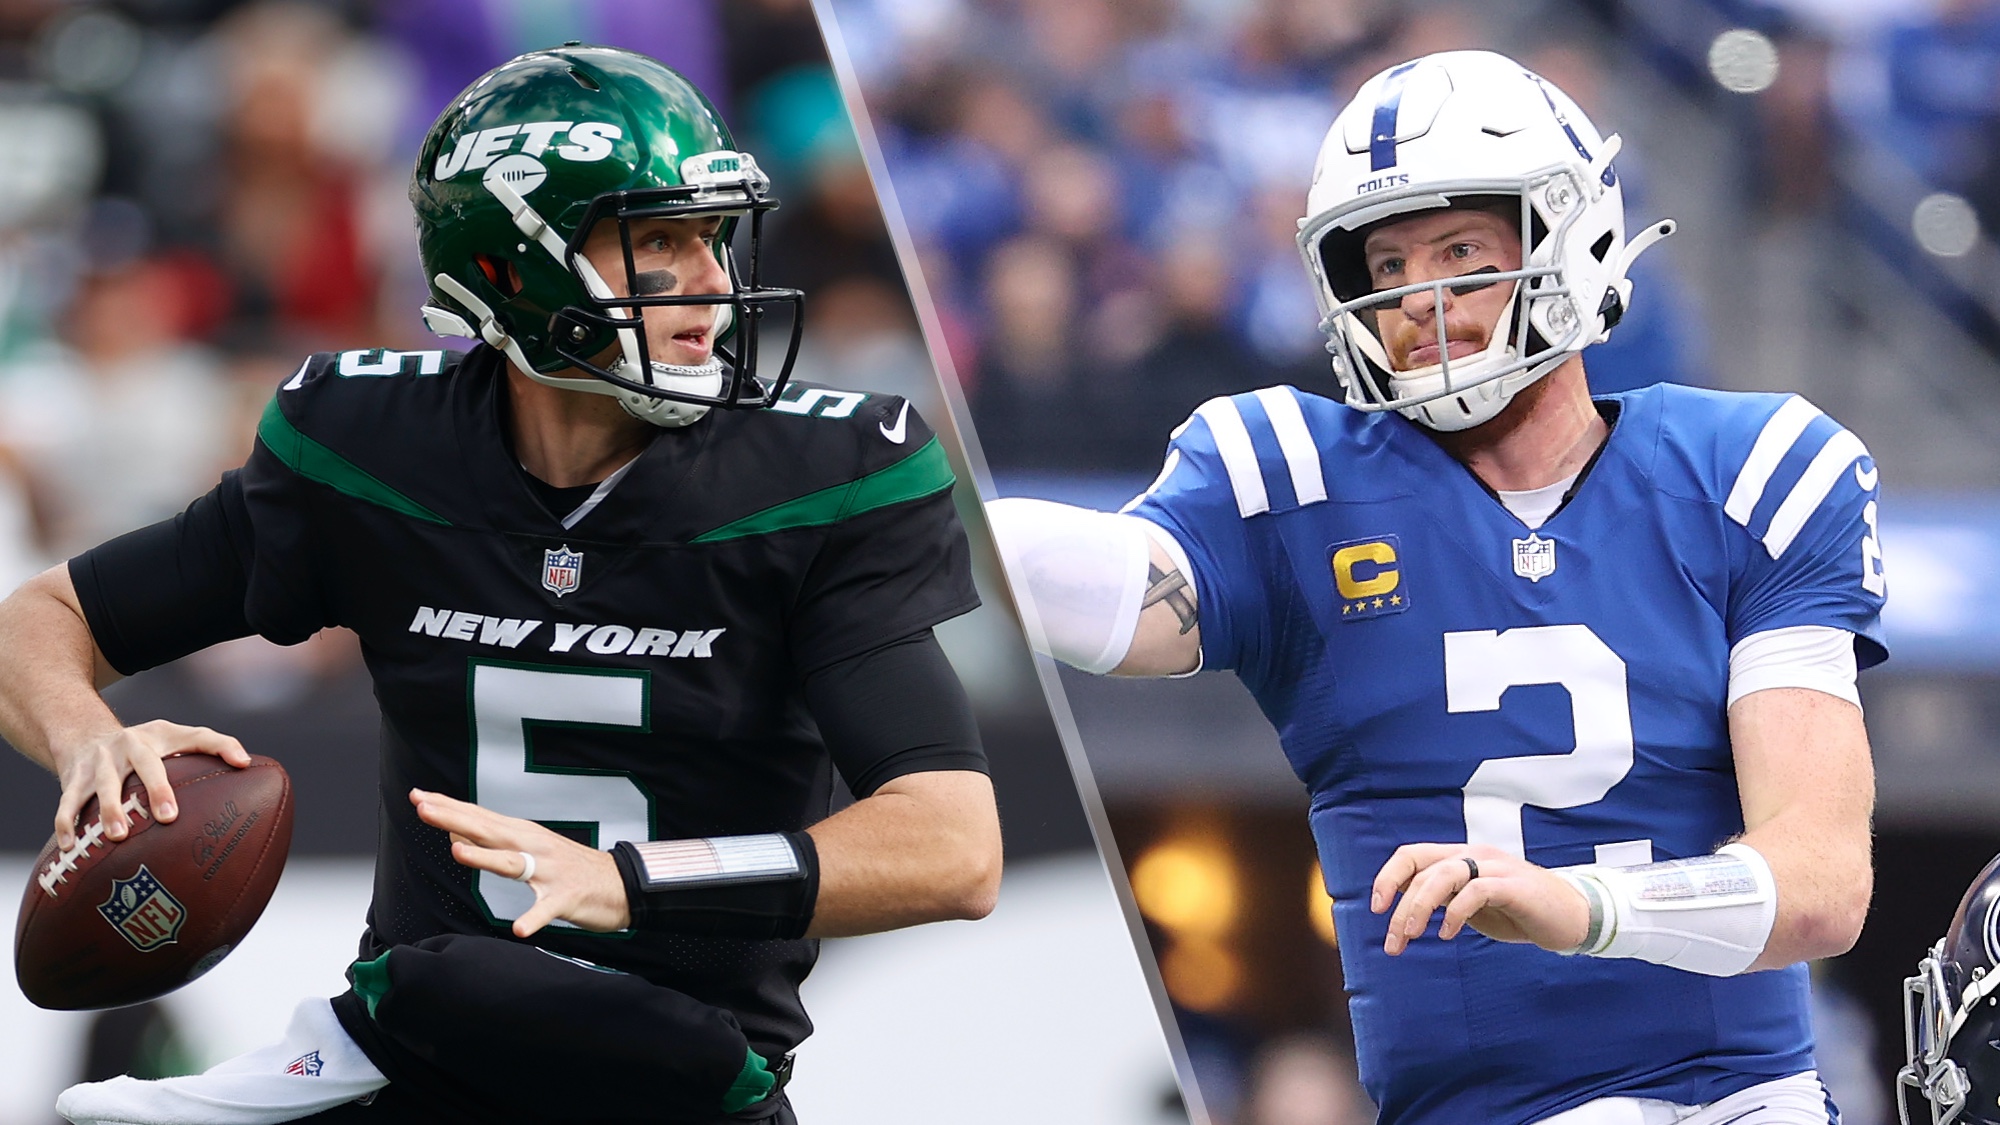 Jets vs Colts live stream is tonight: How to watch Thursday Night